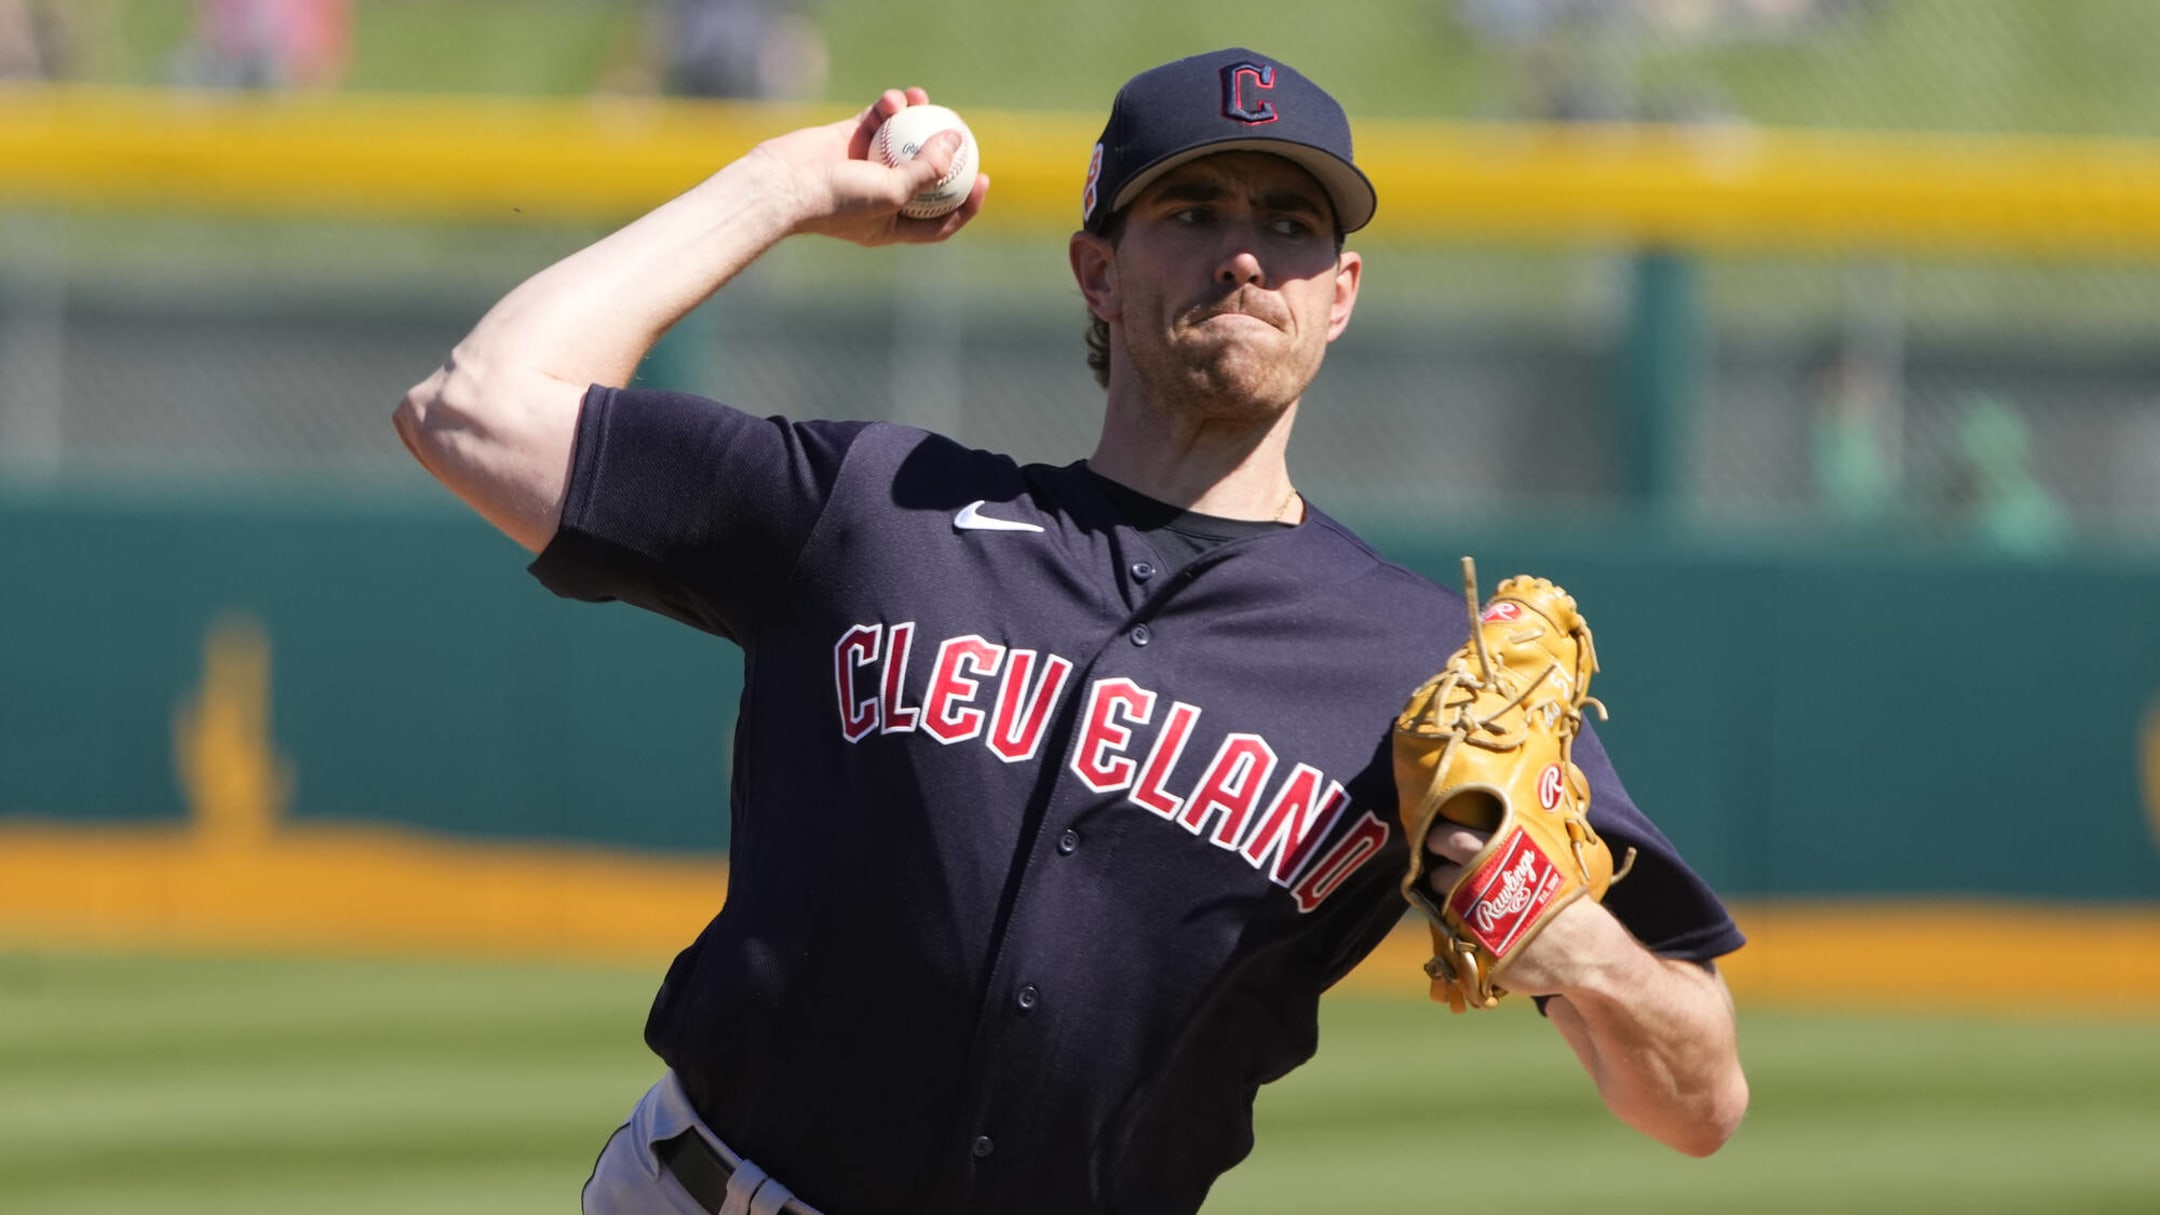 Cleveland Guardians welcome back Corey Kluber to face Shane Bieber